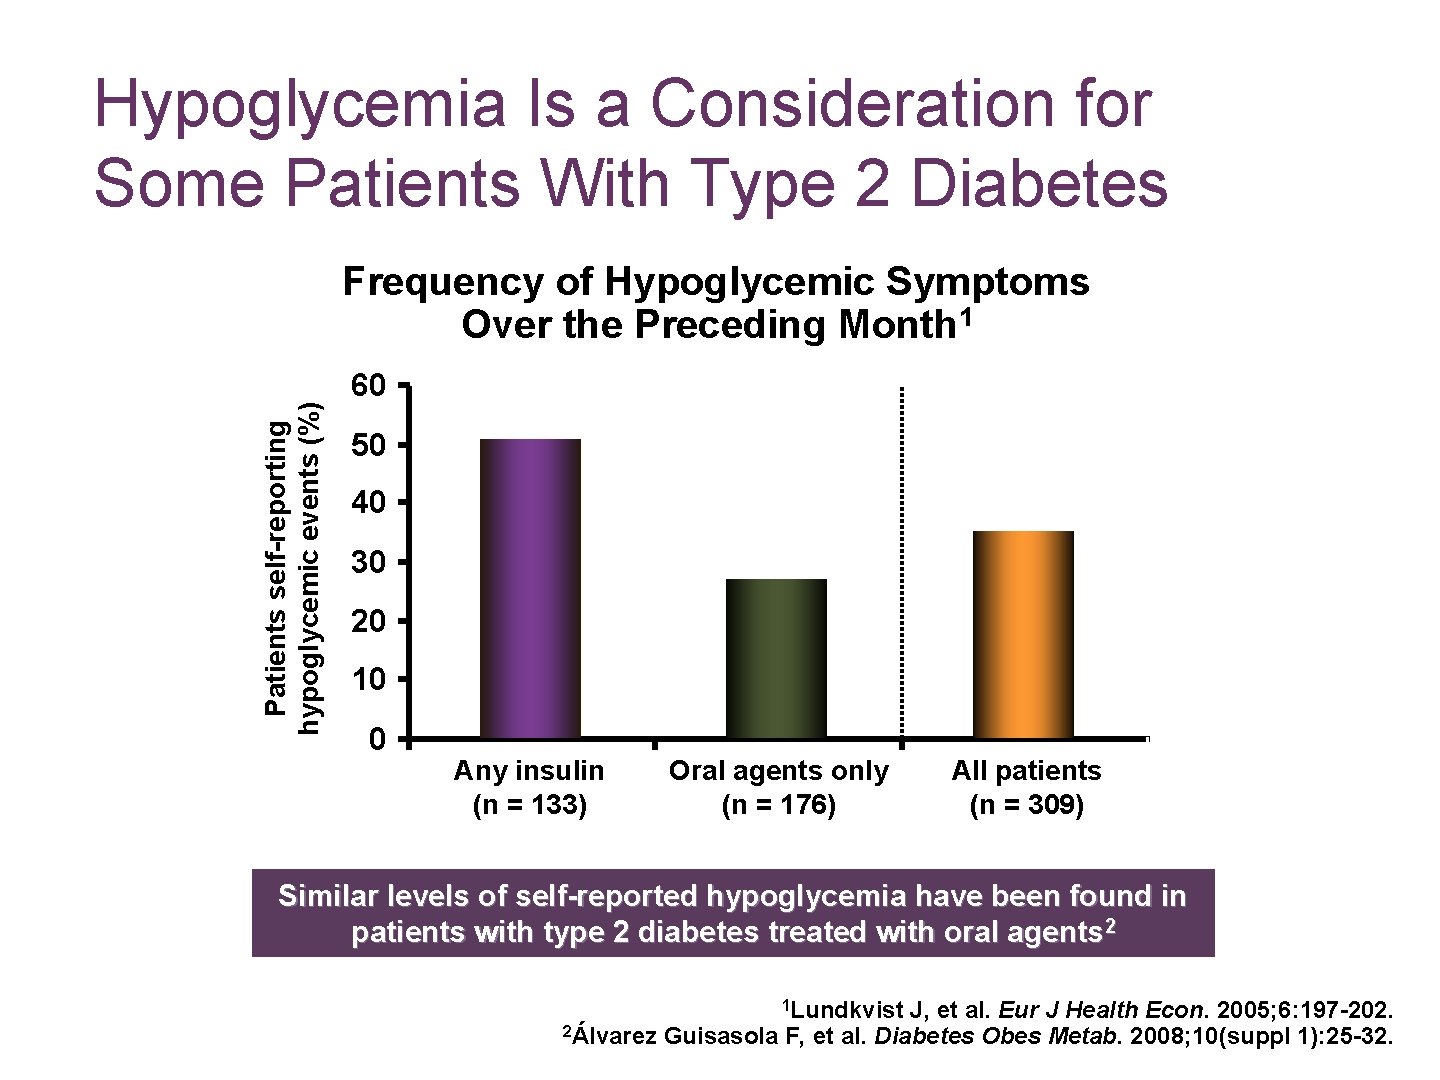 Hypoglycemia Is a Consideration for Some Patients With Type 2 Diabetes Patients self-reporting hypoglycemic